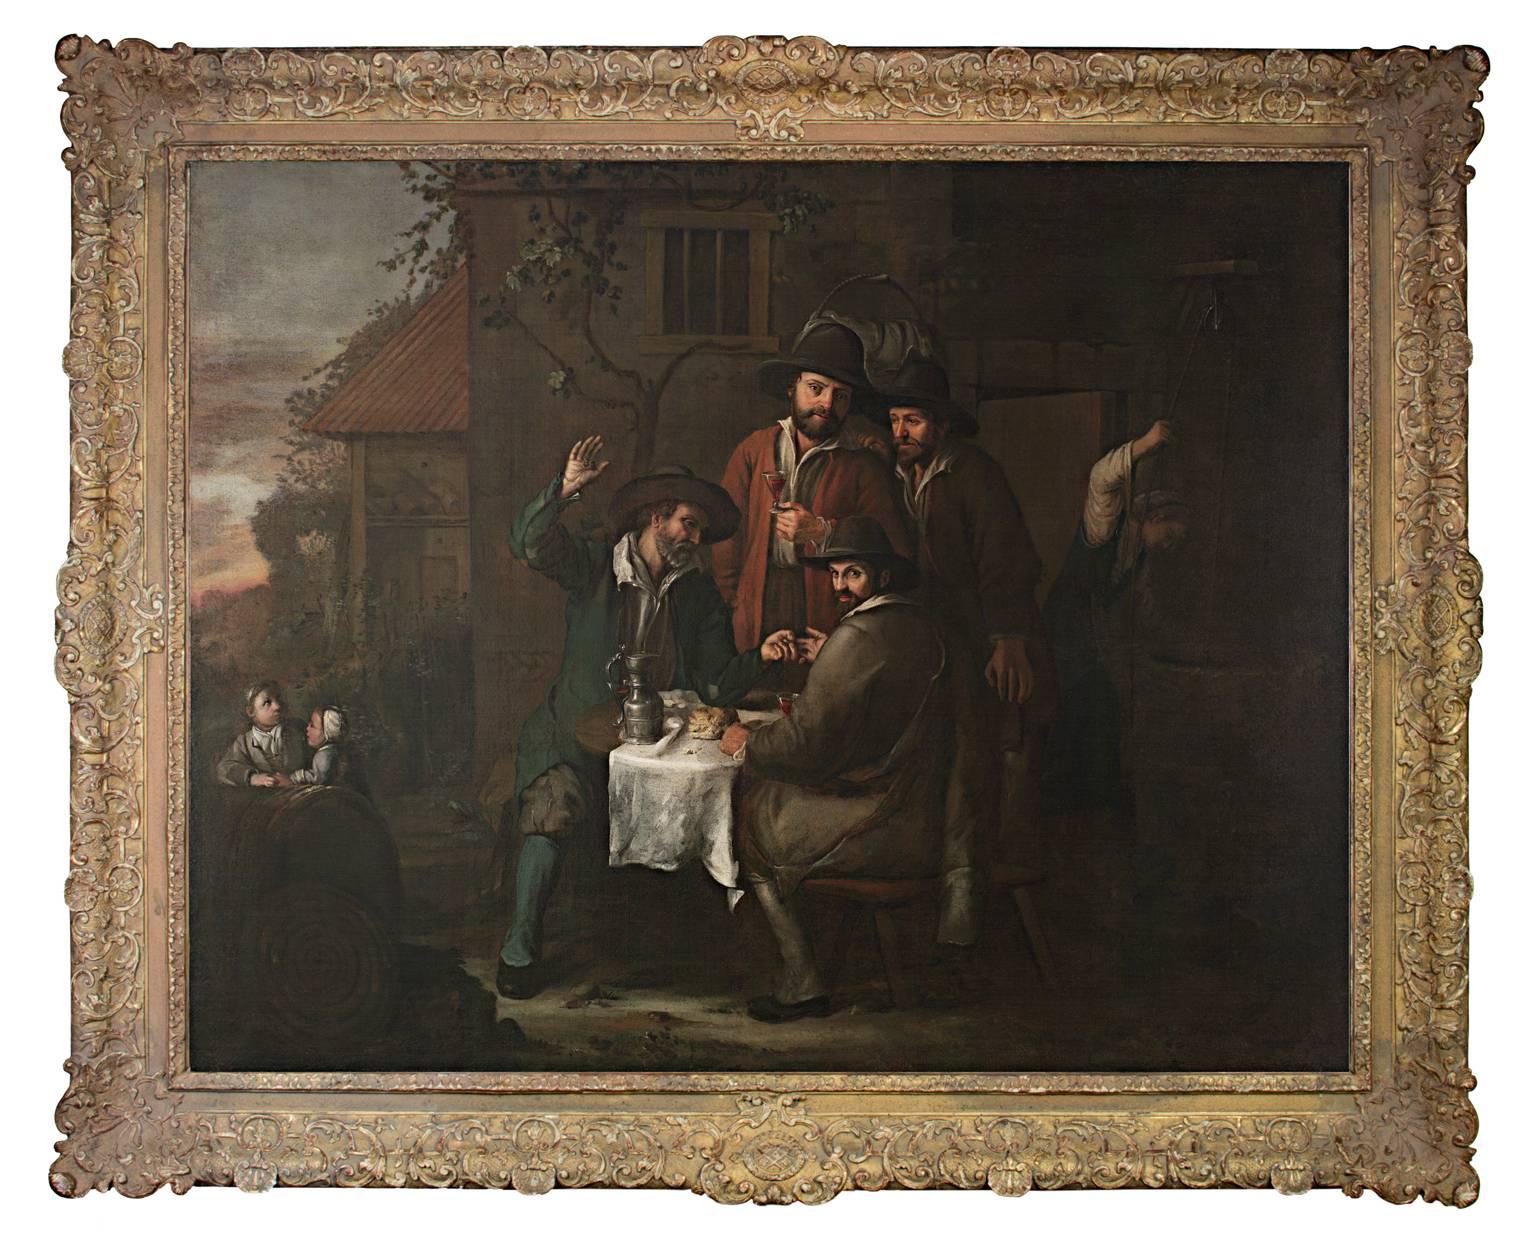 Abraham WIllemsens Still-Life Painting - 1600s Baroque Spiritual Ghosts Supernatural Intense Figures Medieval Old Masters